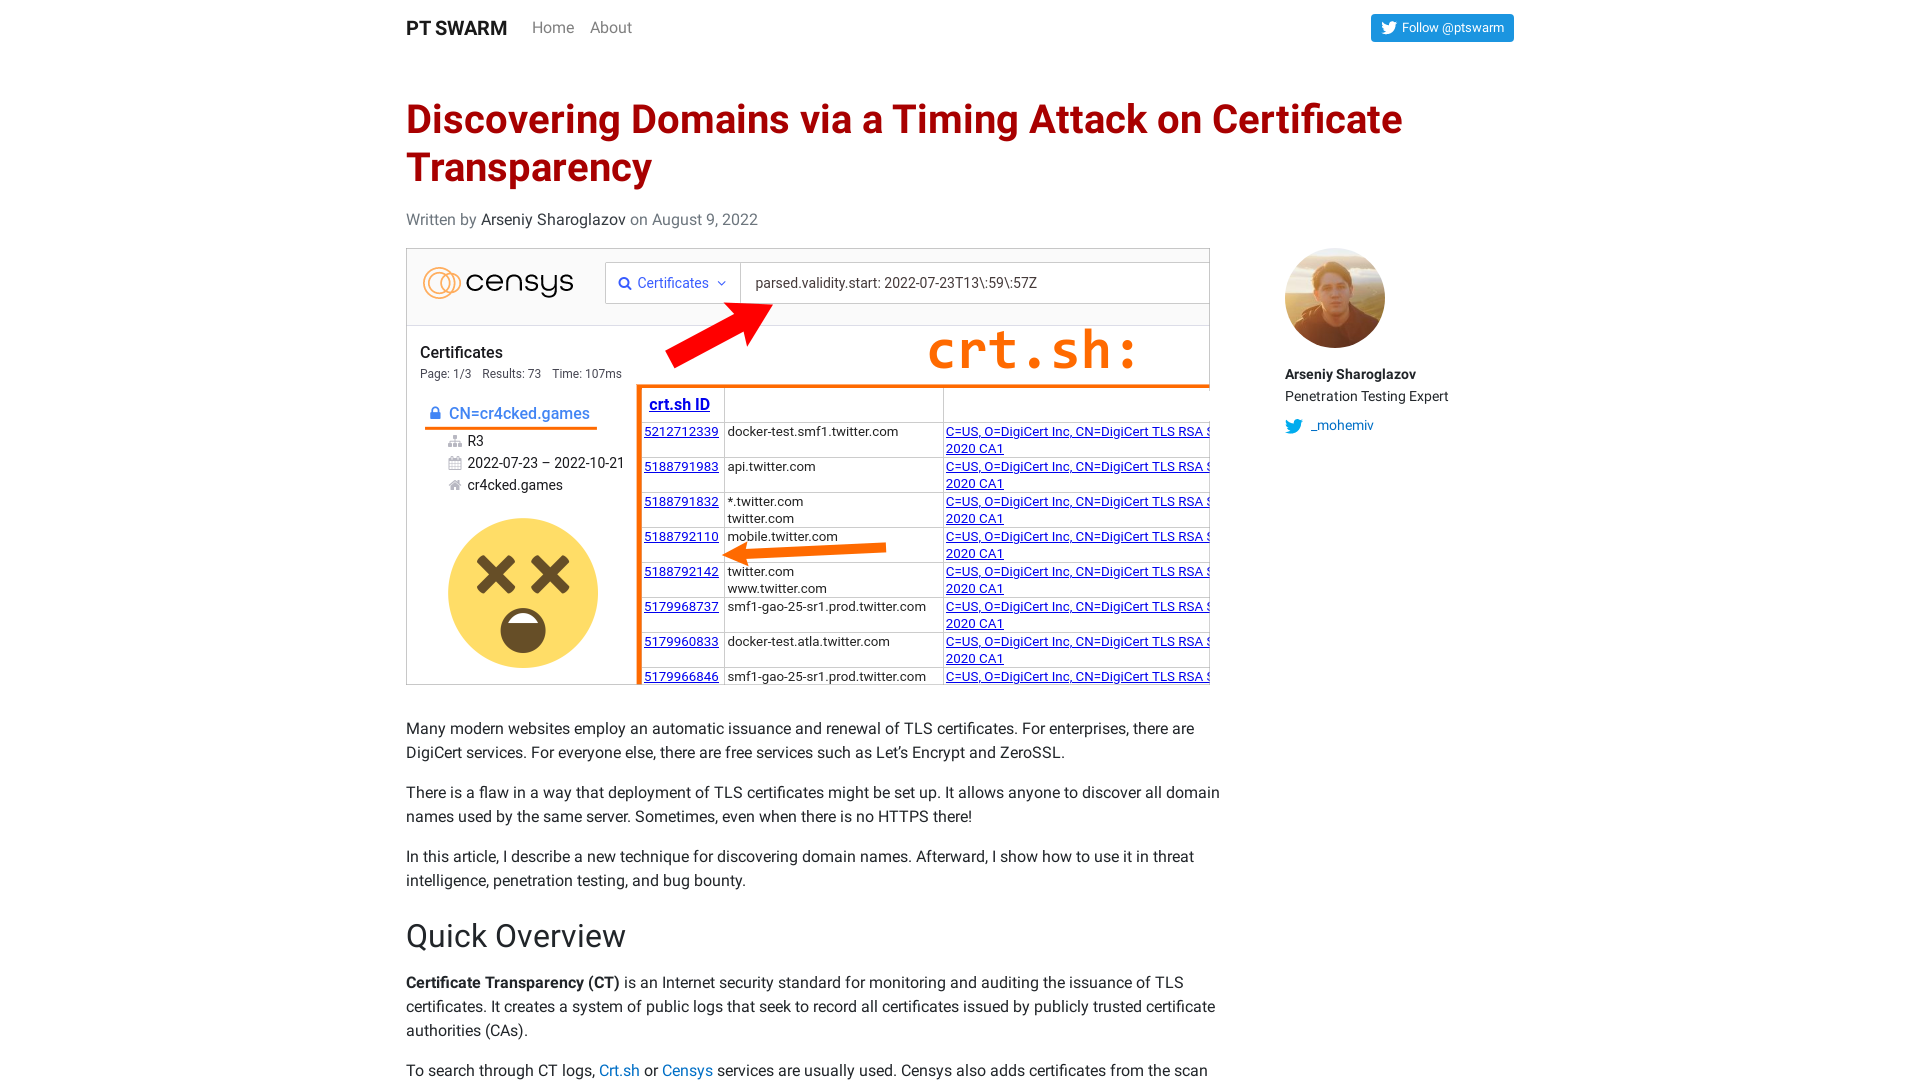 Discovering Domains via a Timing Attack on Certificate Transparency – PT SWARM